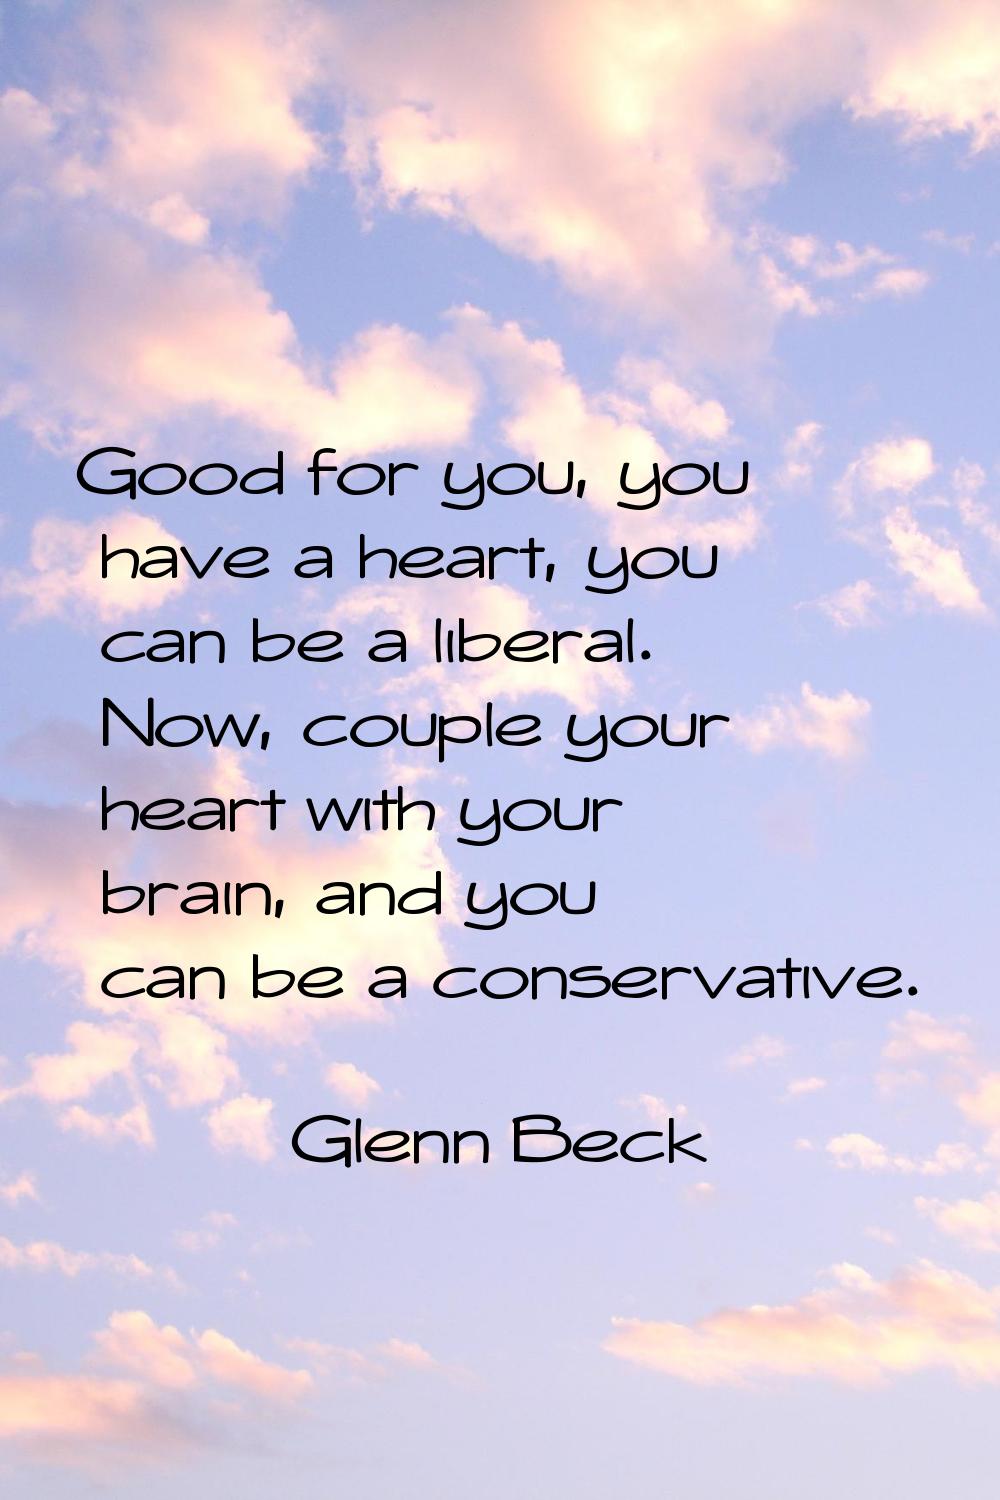 Good for you, you have a heart, you can be a liberal. Now, couple your heart with your brain, and y